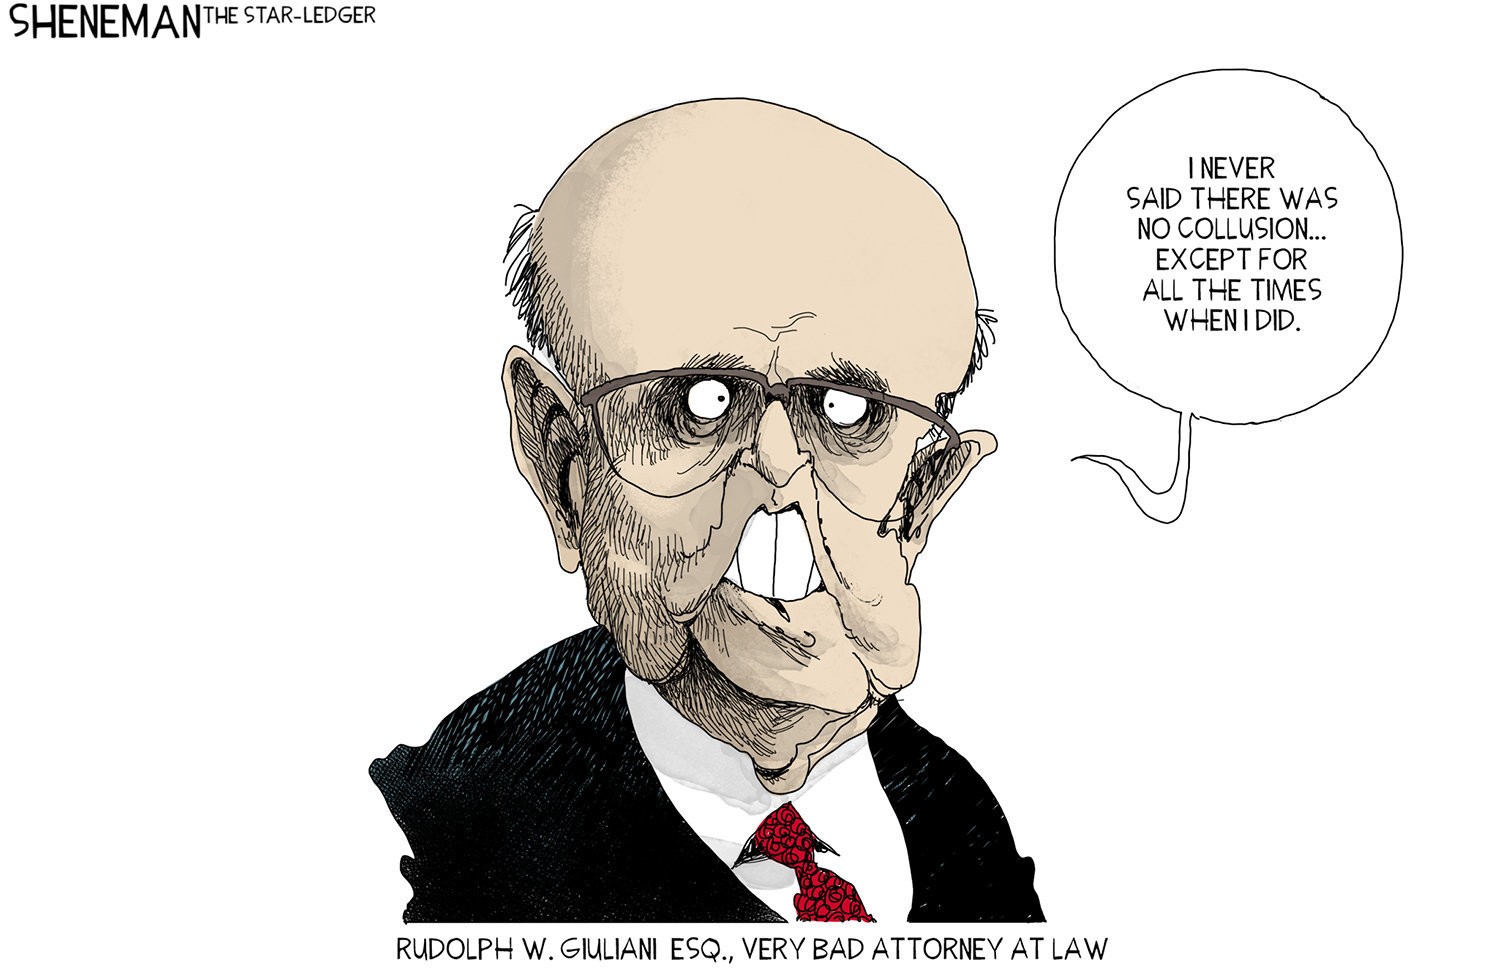 rudy giuliani cartoon - Shenemanthe StarLedger I Never Said There Was No Collusion... Except For All The Times When I Did. Vw Rudolph W. Giuliani Esq., Very Bad Attorney At Law